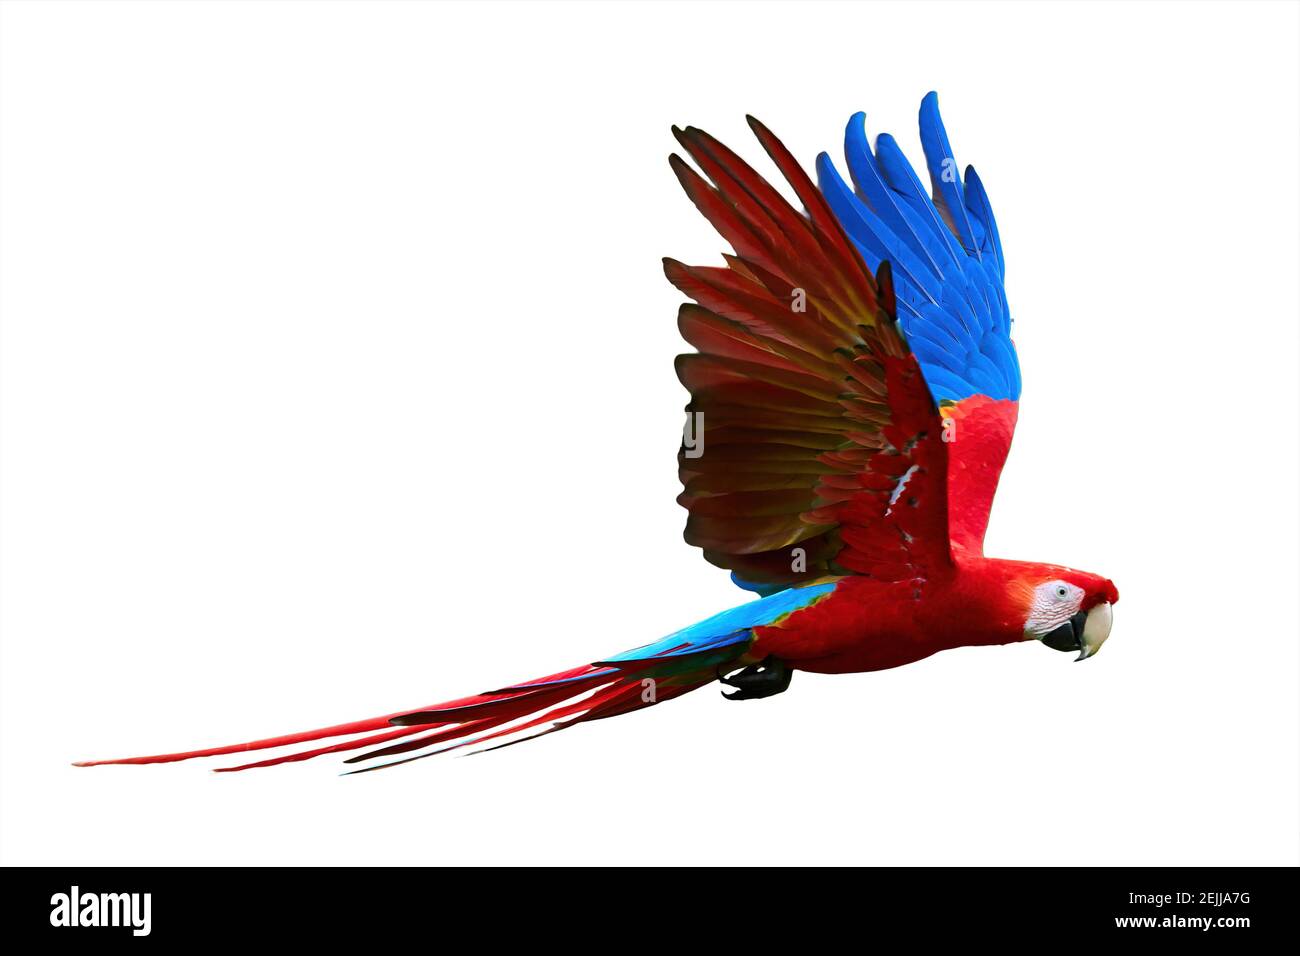 Flying wild red parrot, isolated on white background. Bright red and blue south american parrots,  Ara macao, Scarlet Macaw, flying with outstretched Stock Photo